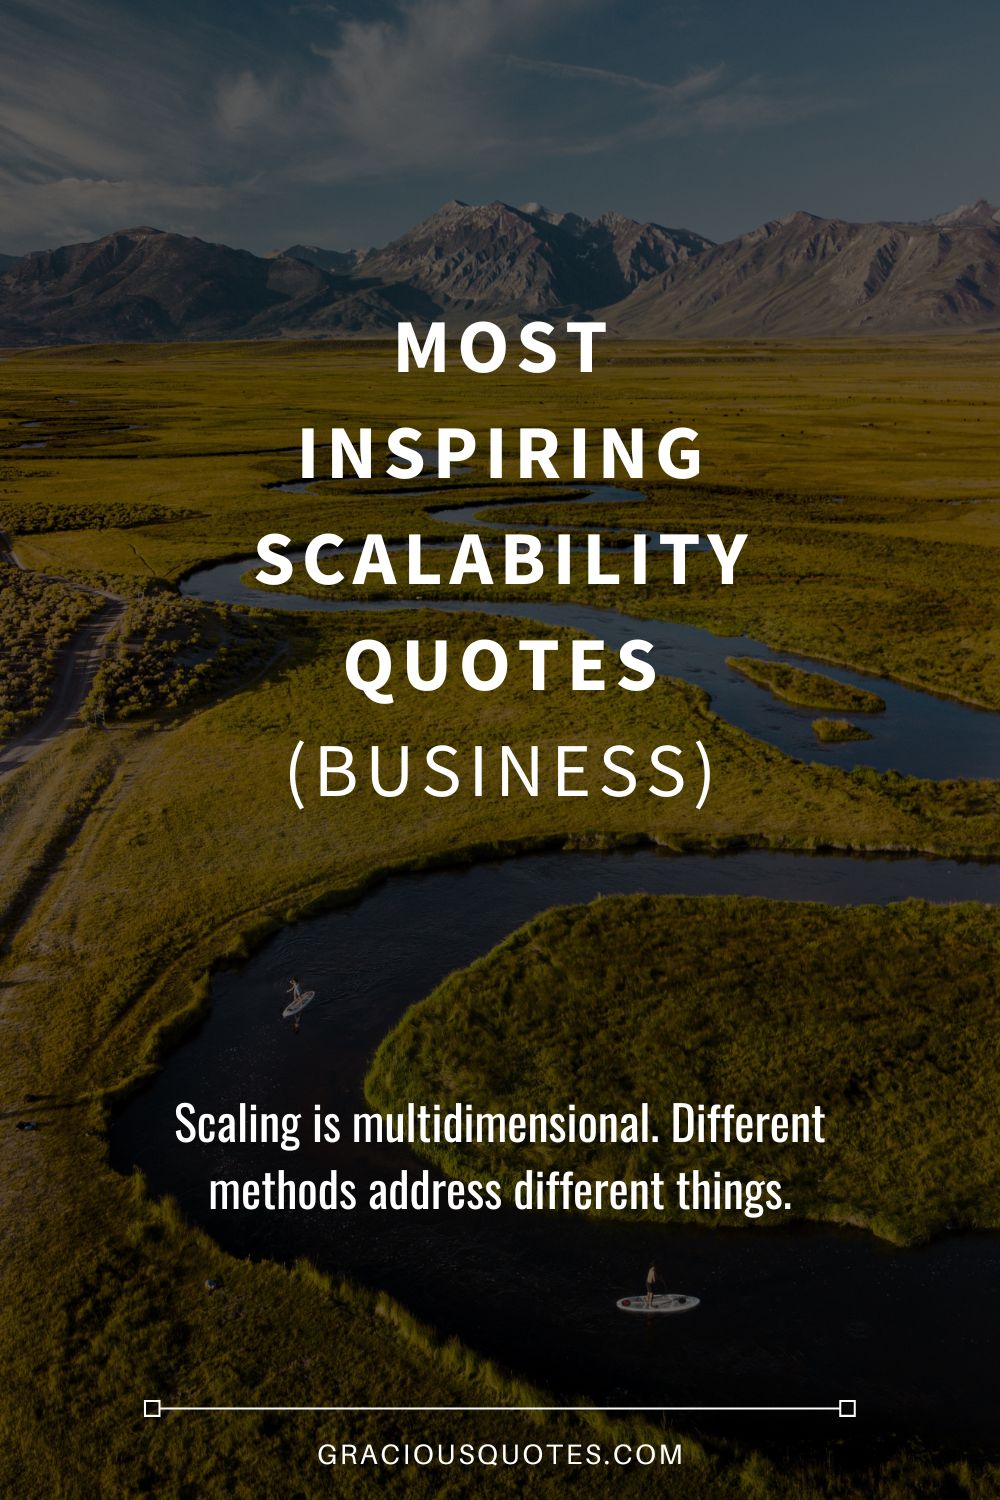 Most Inspiring Scalability Quotes (BUSINESS) - Gracious Quotes EDITED